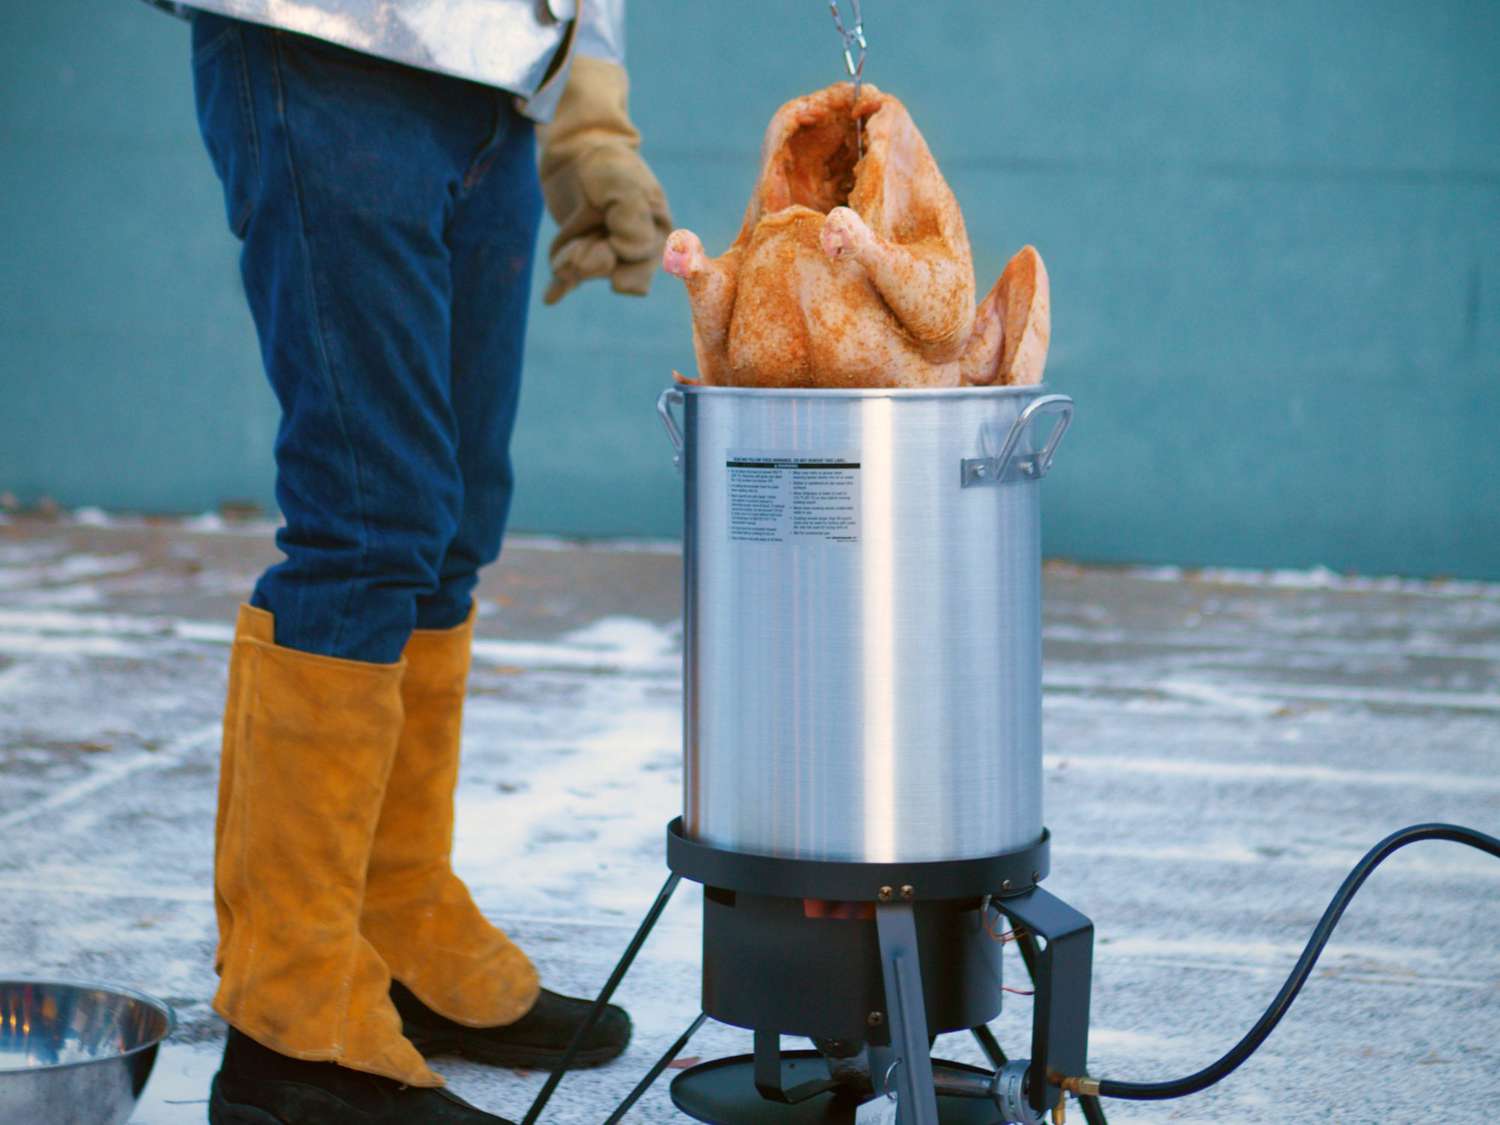 how-to-deep-fry-turkey-safely